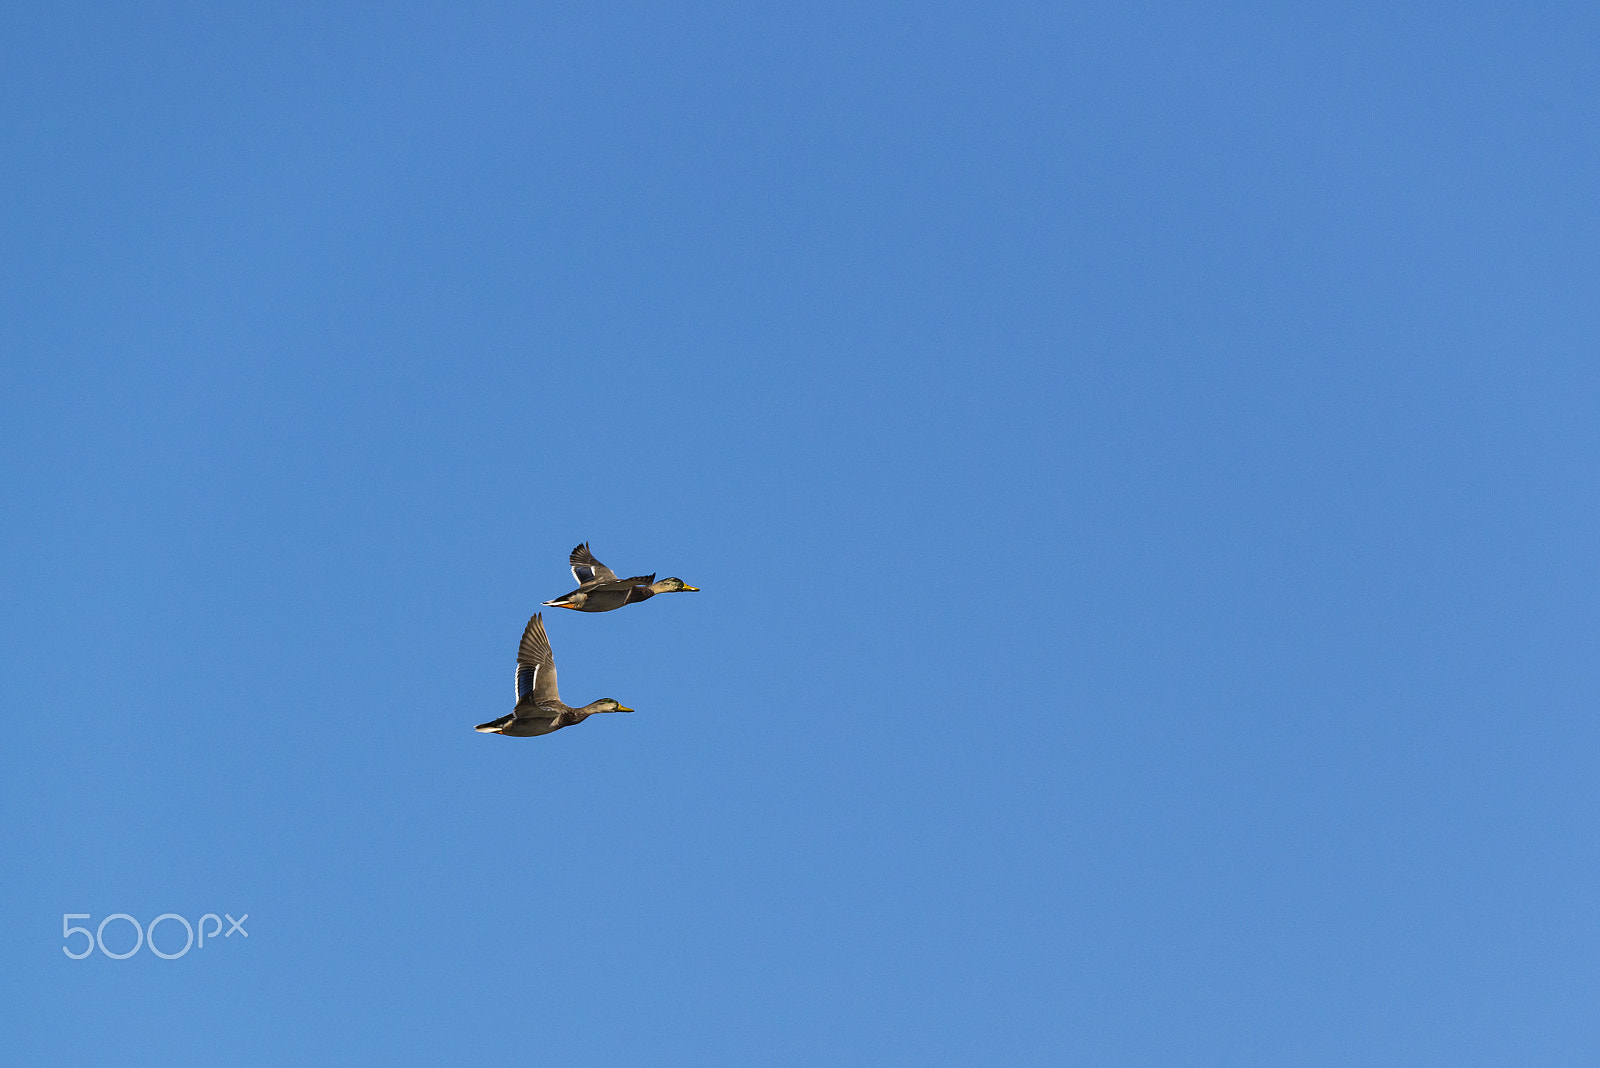 Nikon D800 + Sigma 150-600mm F5-6.3 DG OS HSM | S sample photo. Two ducks in the sky photography